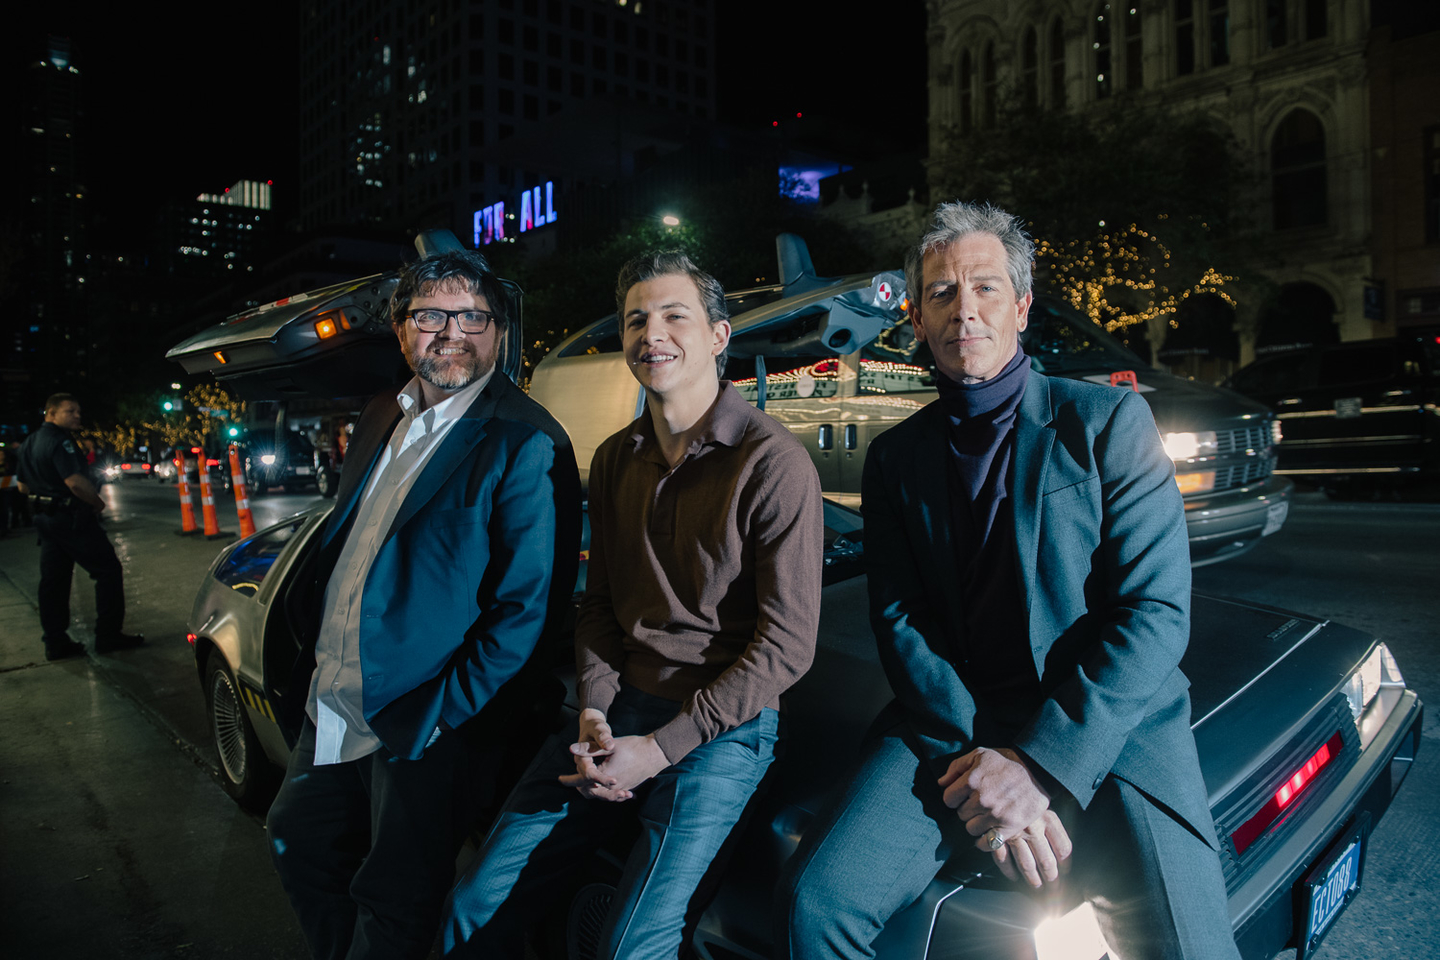 Ernie Cline, Tye Sheridan and Ben Mendelsohn on Cline's DeLorean in front of the Paramount Theatre at the World Premiere of Ready Player One. Photo by Danny Matson